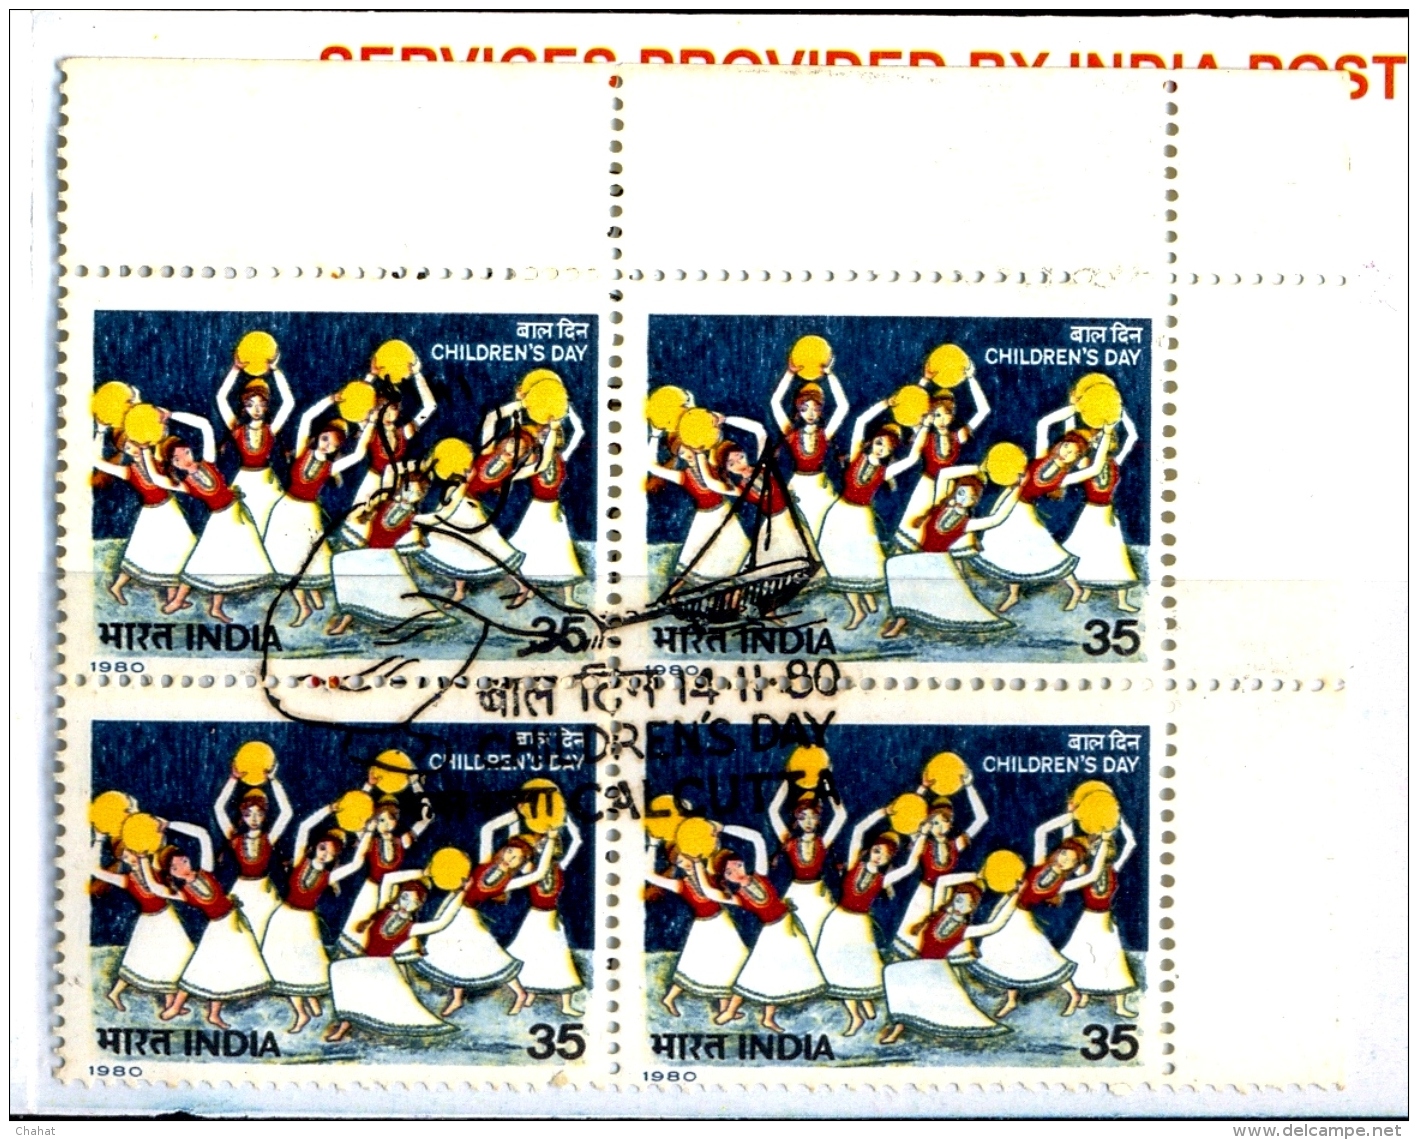 CHILDRENS DAY-1980-INDIA POSTAGE GREETING CARD WITH EVENT CANCELLATIONS &amp; BOOKLET-ERROR-EXTREMELY SCARCE-MNH-M-159